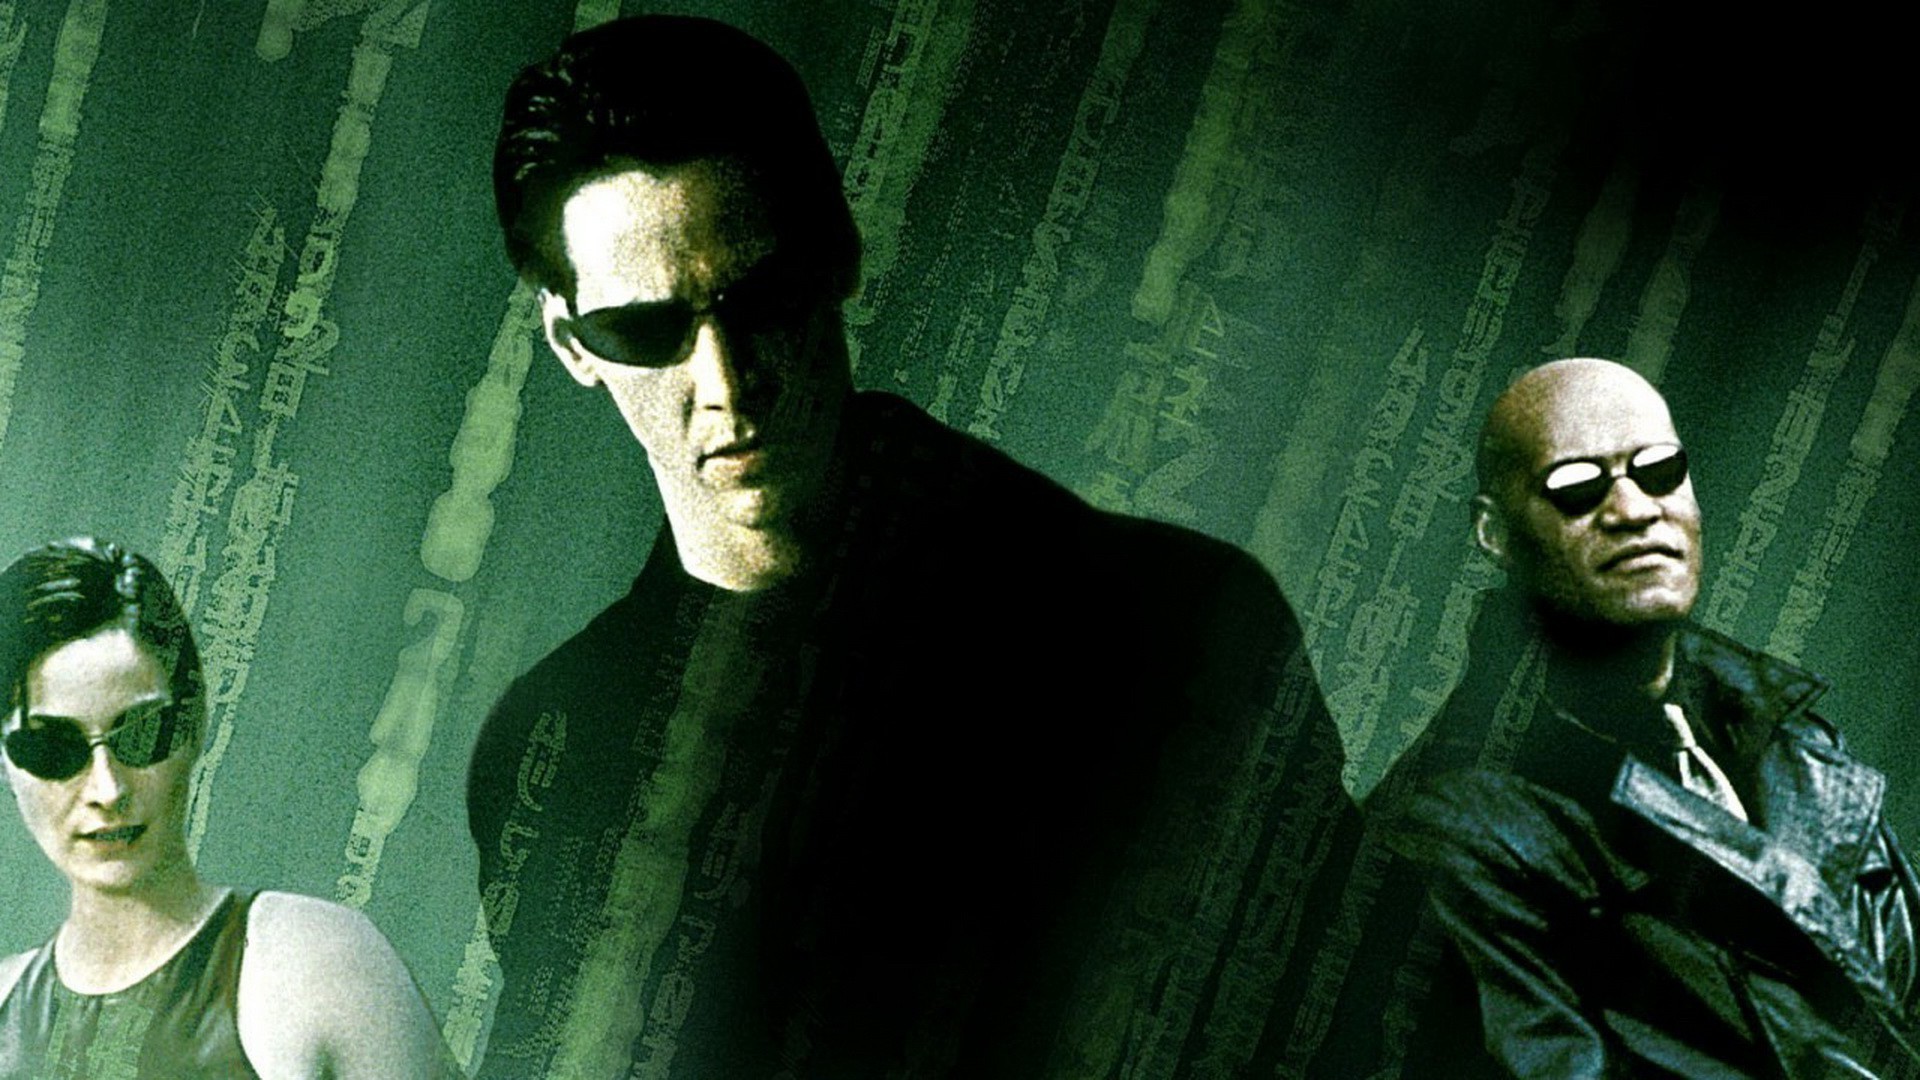 The Matrix, Movies, Neo, Keanu Reeves, Morpheus, Trinity, Carrie Anne Moss  Wallpapers HD / Desktop and Mobile Backgrounds